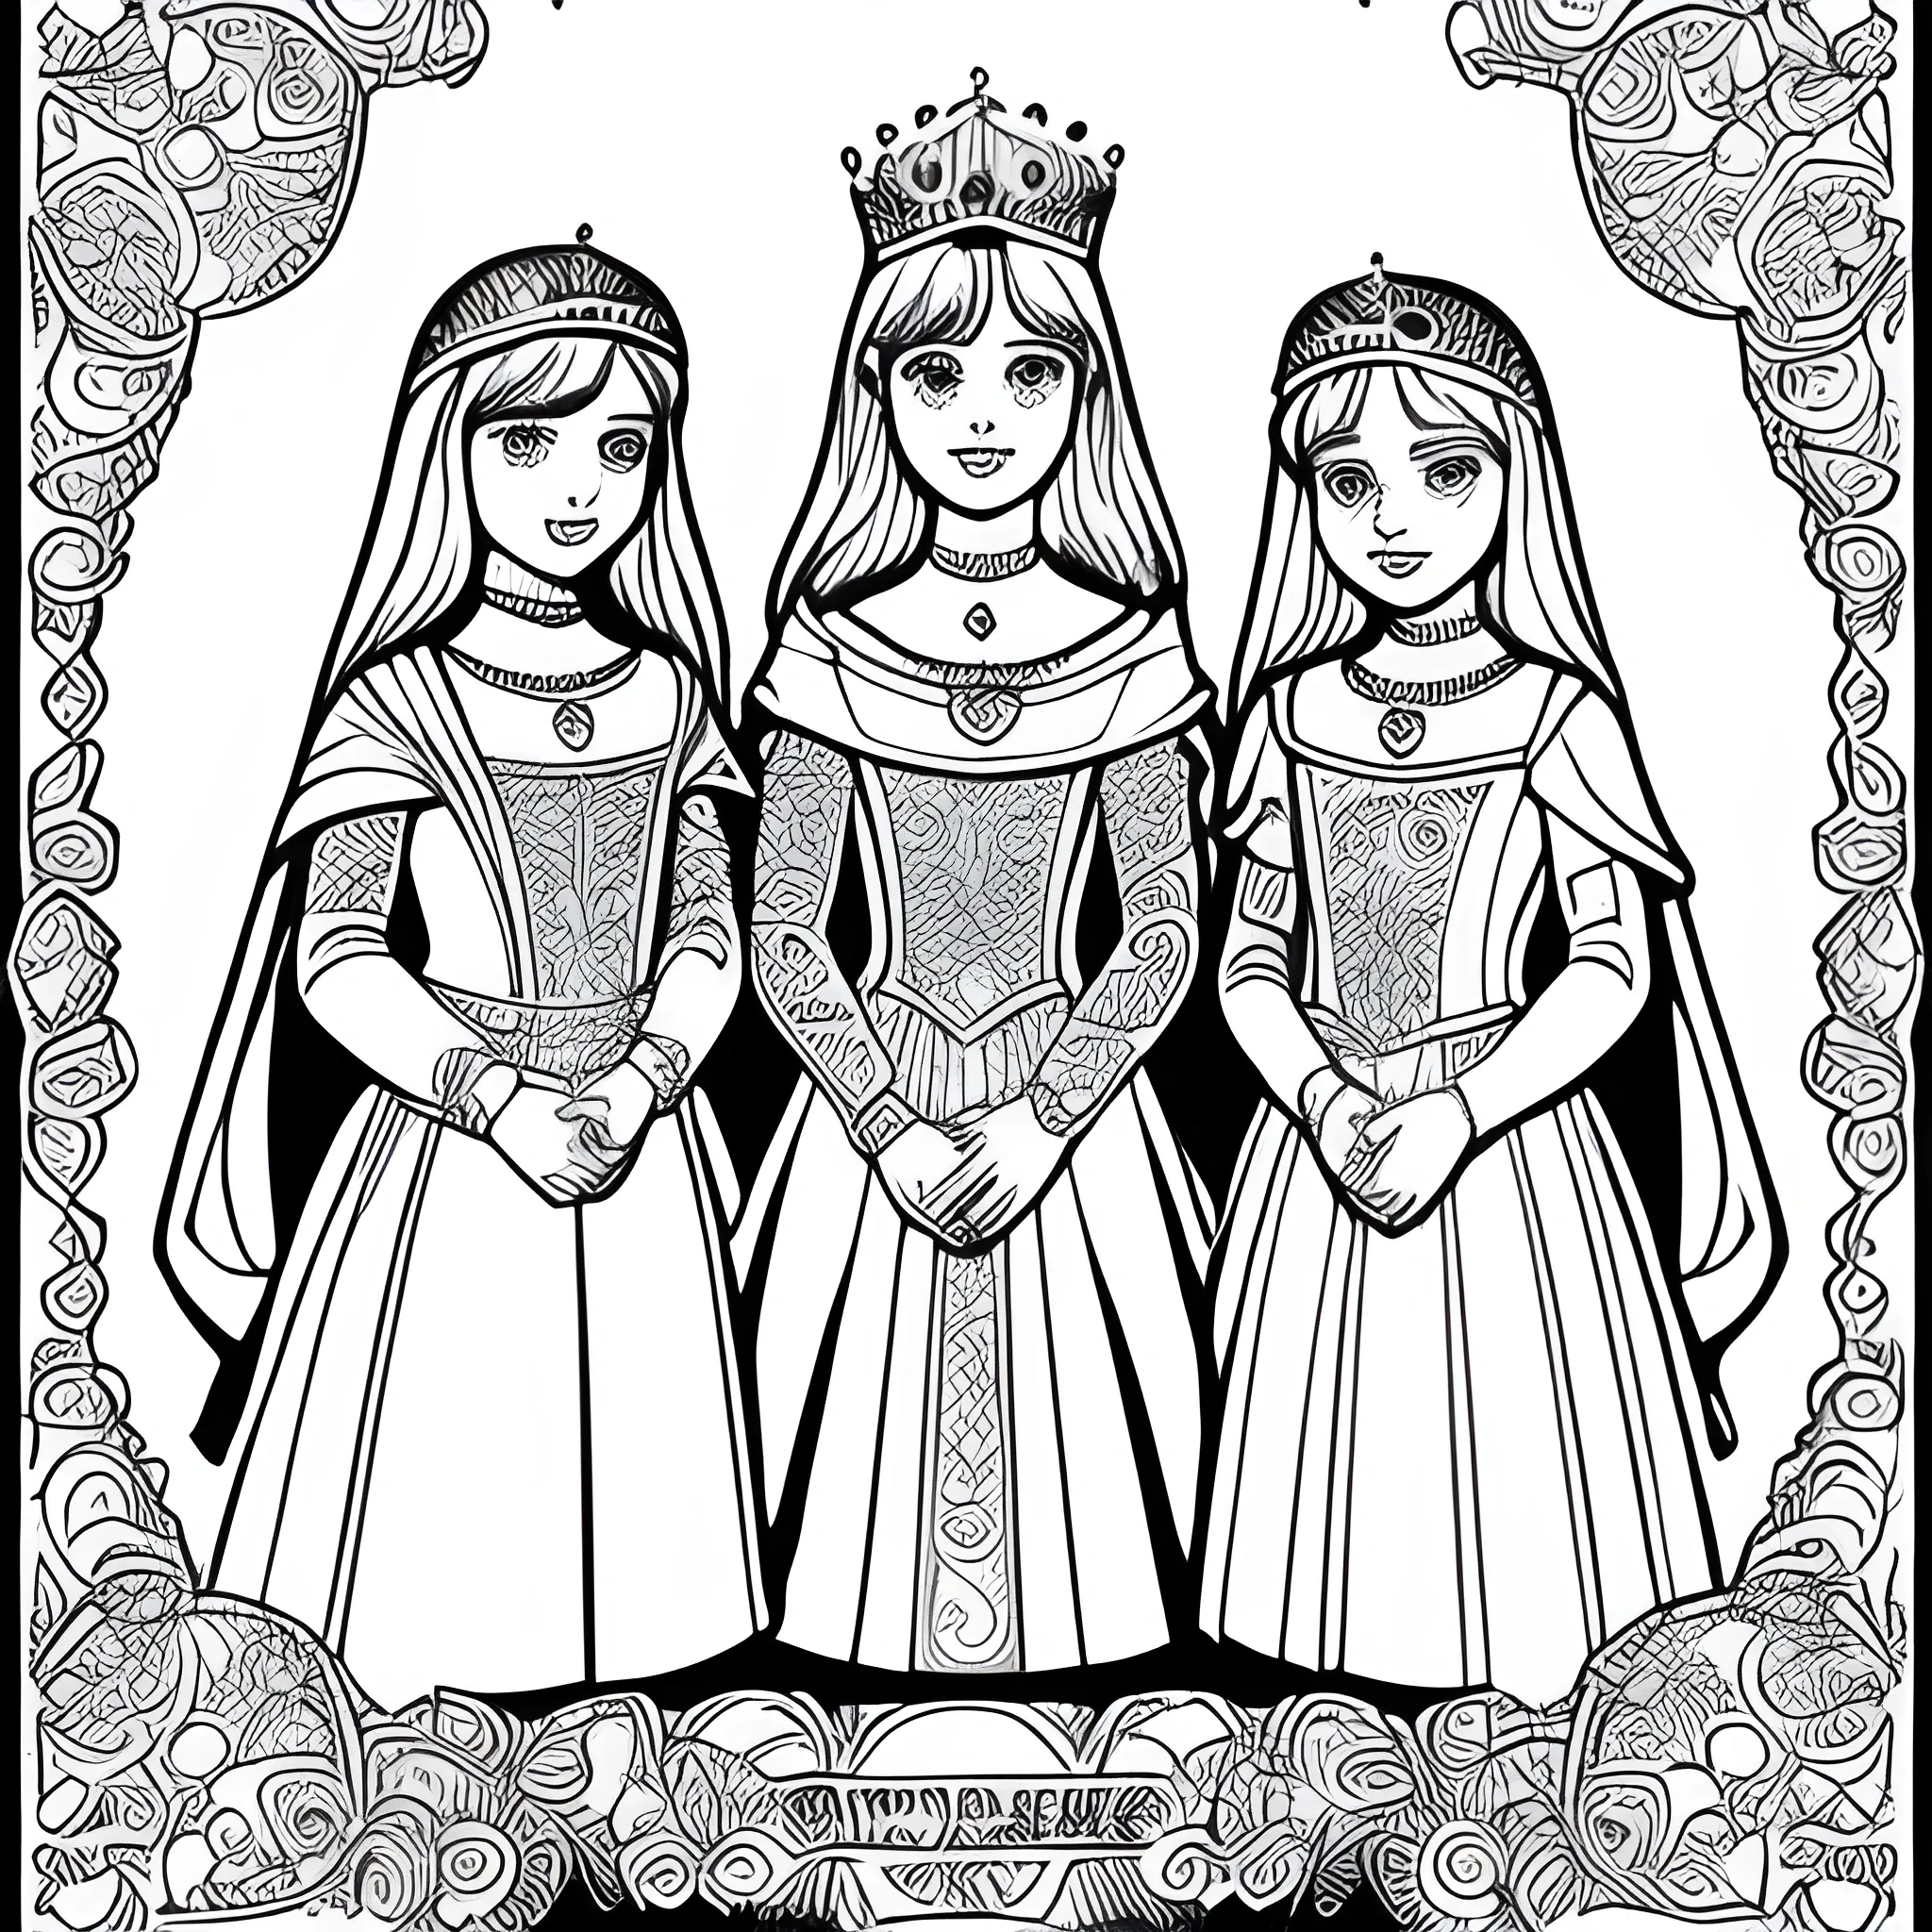 Colouring page, 3 sisters, not any princesses, they shouldn't be wearing a lot of jewellery, 
